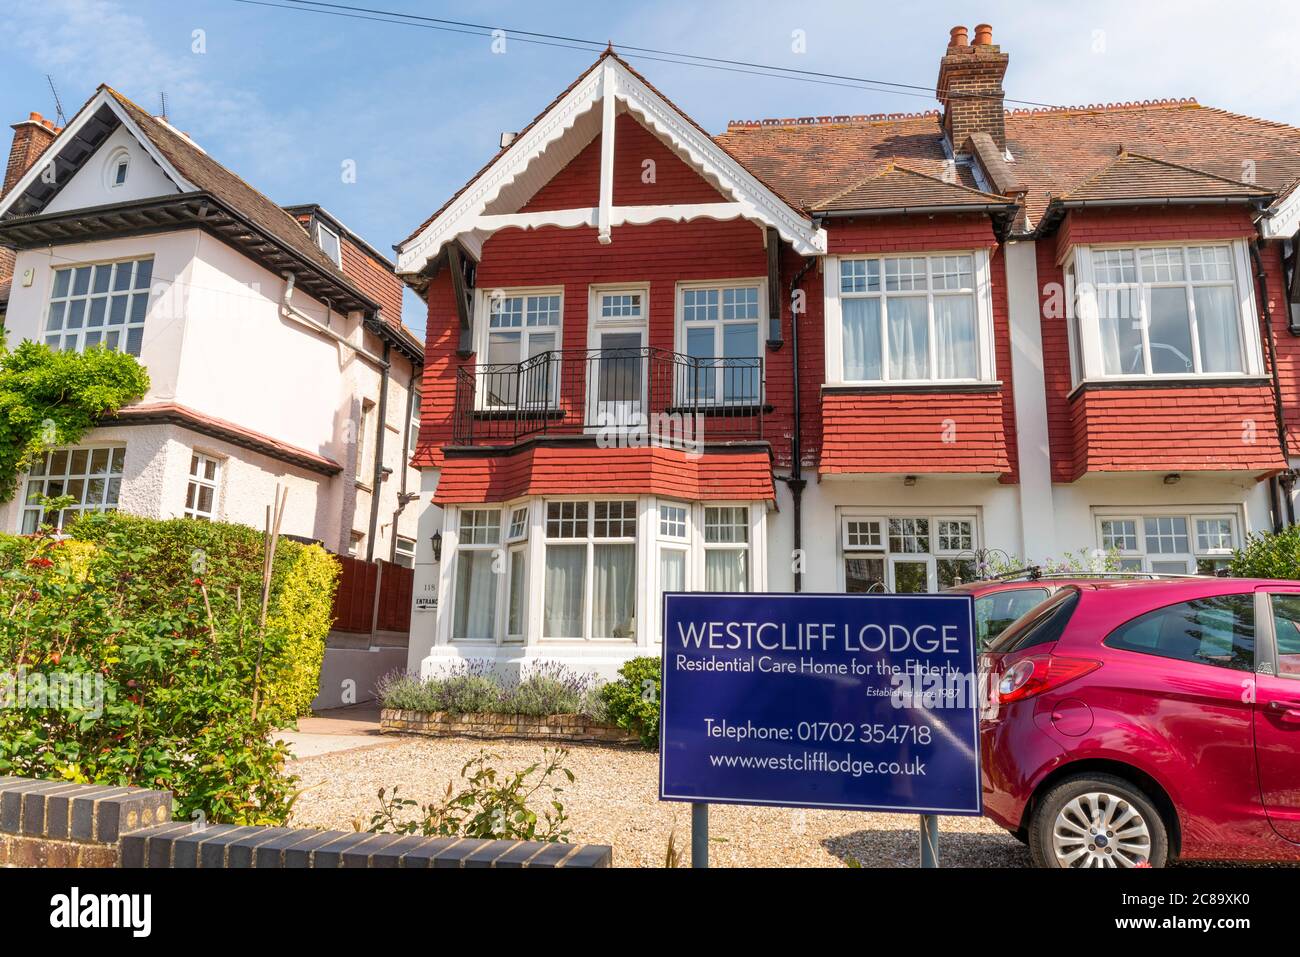 Westcliff Lodge Residential Care Home for the elderly in Westcliff on Sea, Southend, Essex, UK. COVID-19, Coronavirus lockdown period. Health. Senior Stock Photo